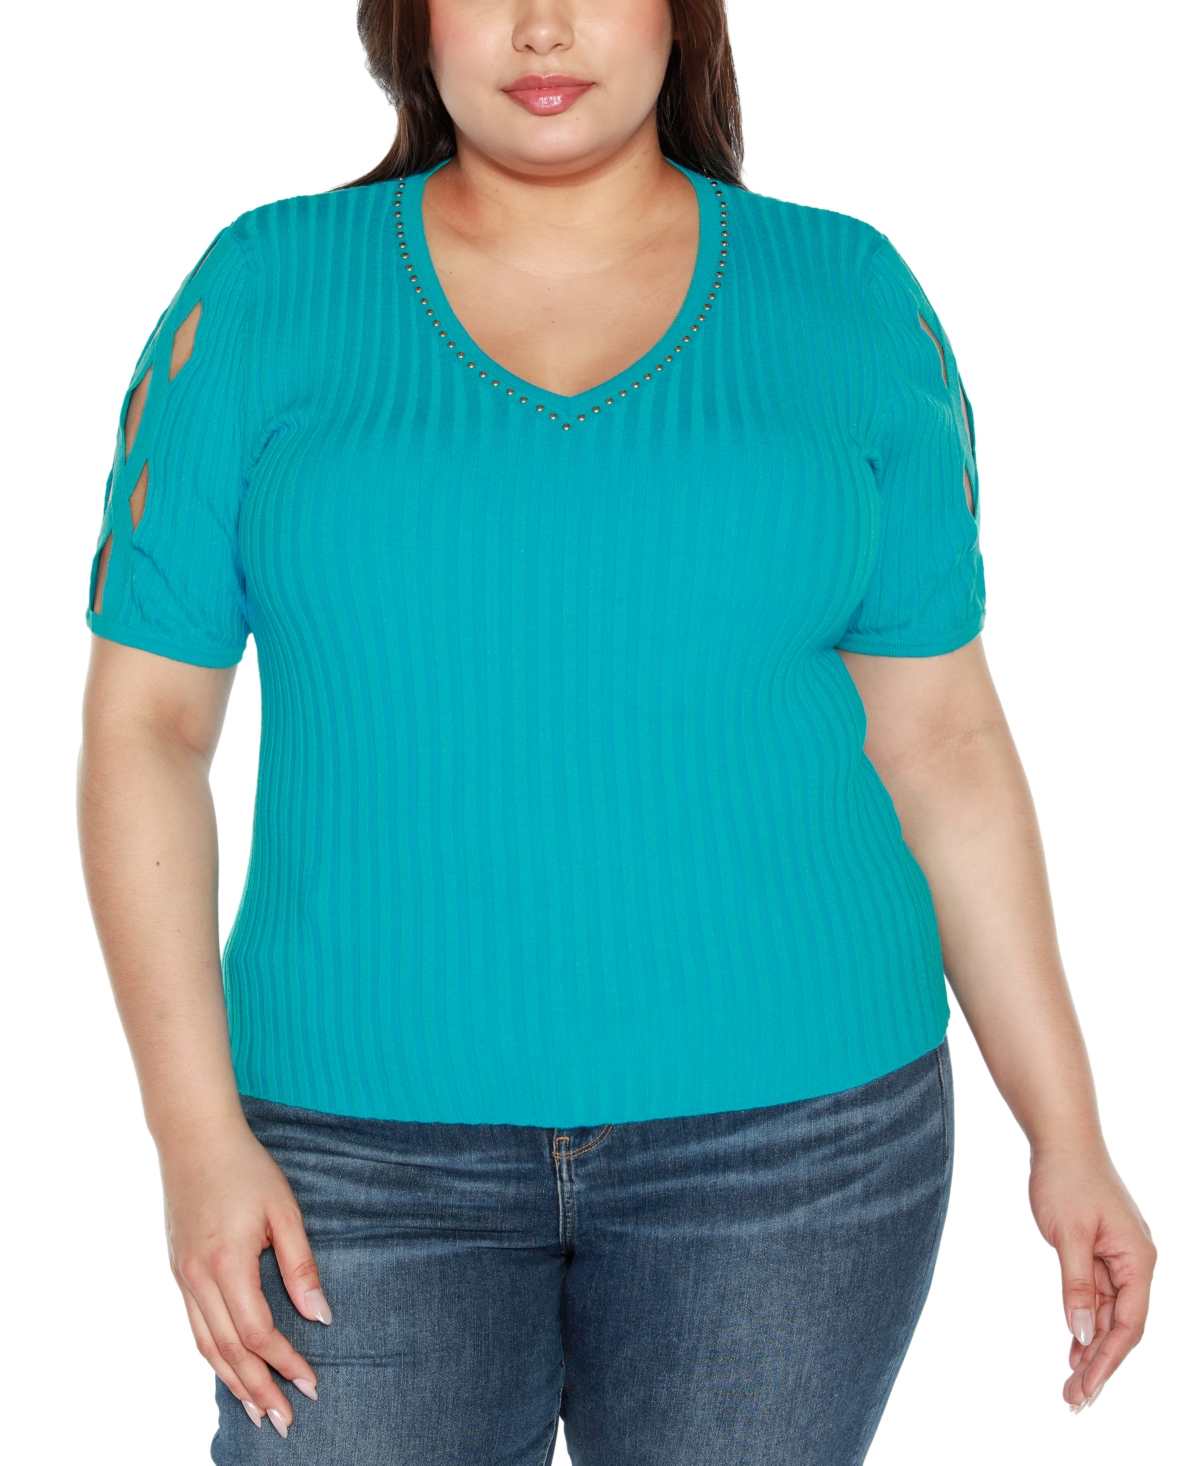 Belldini Black Label Plus Size Embellished Criss Cross Sleeve Sweater In Blue